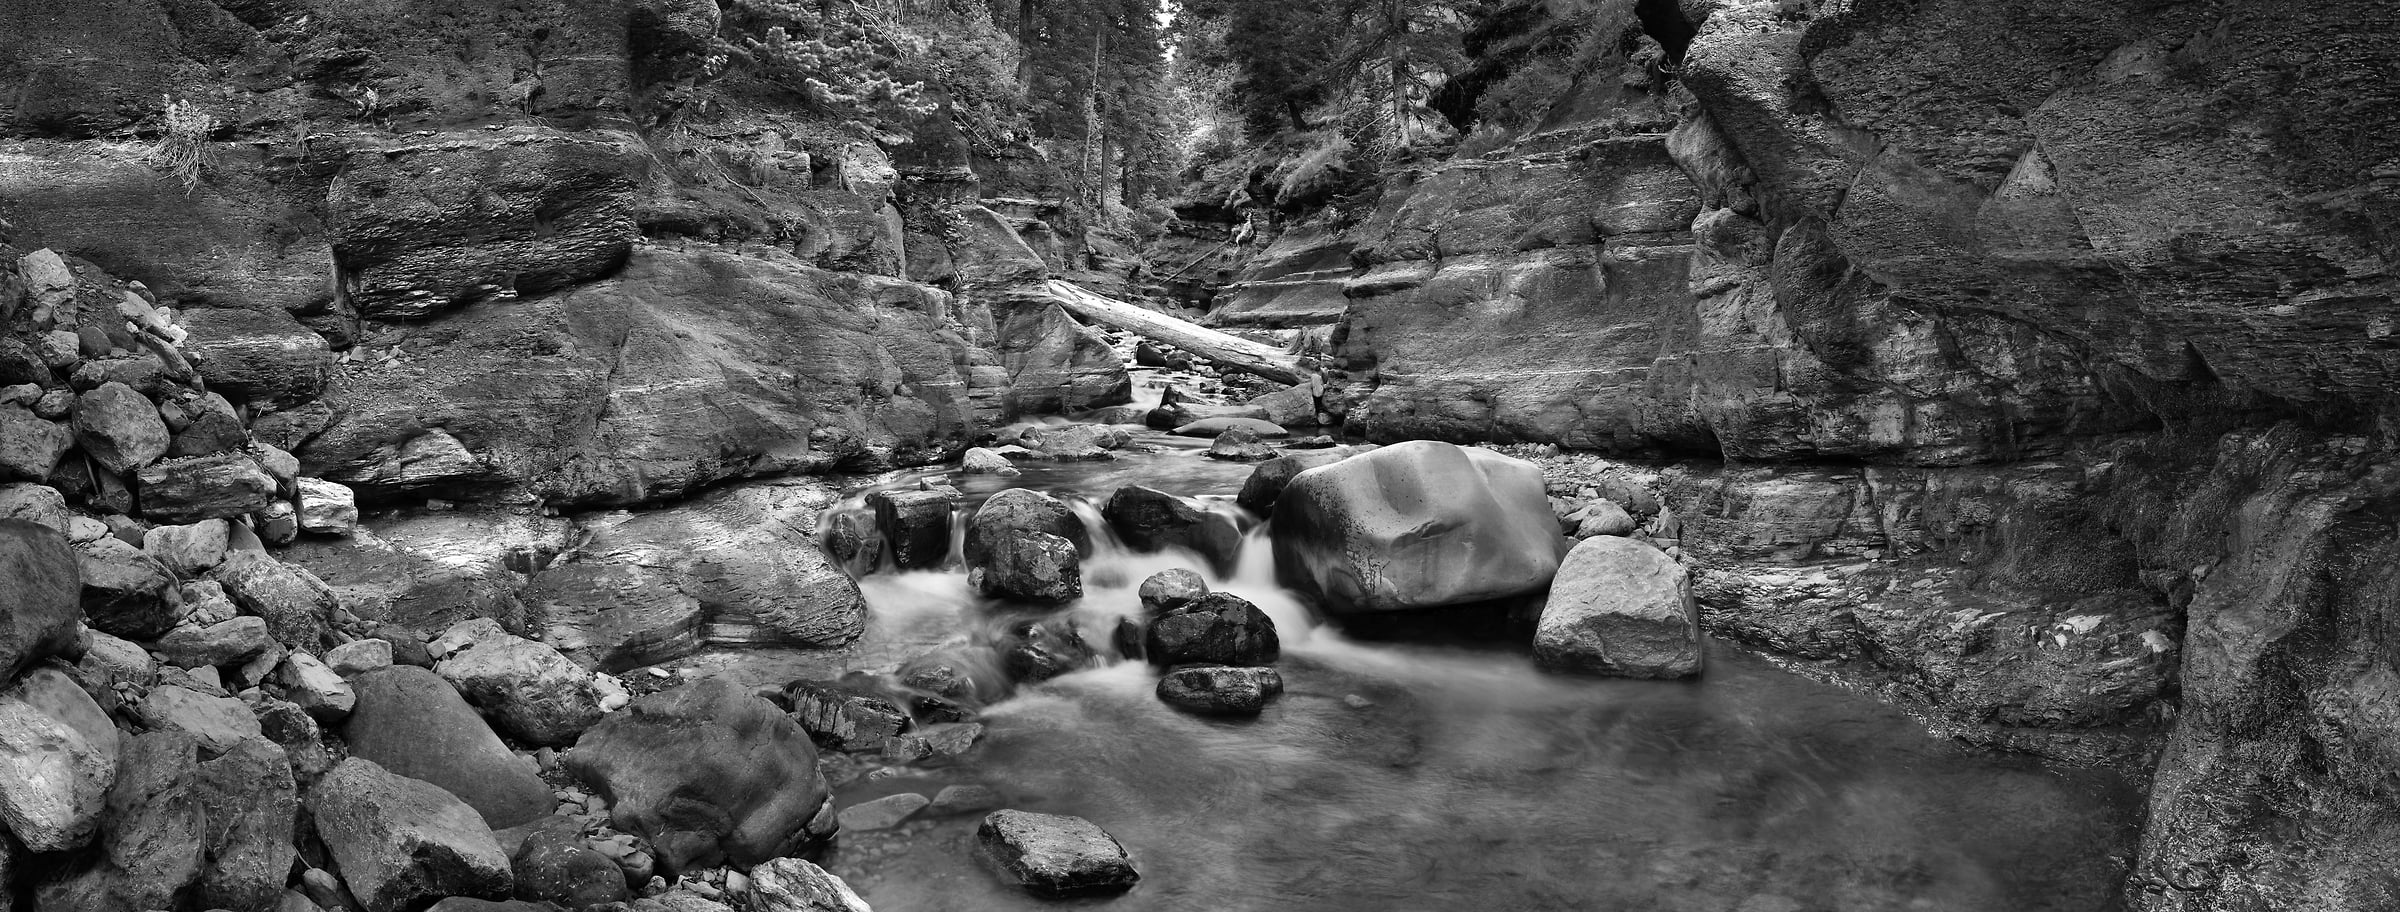 4,741 megapixels! A very high resolution, large-format VAST photo print of a stream, waterfall, and rocks; black and white fine art nature photo created by Steve Webster in Red Rock Canyon, Waterton Lakes National Park, Alberta Canada